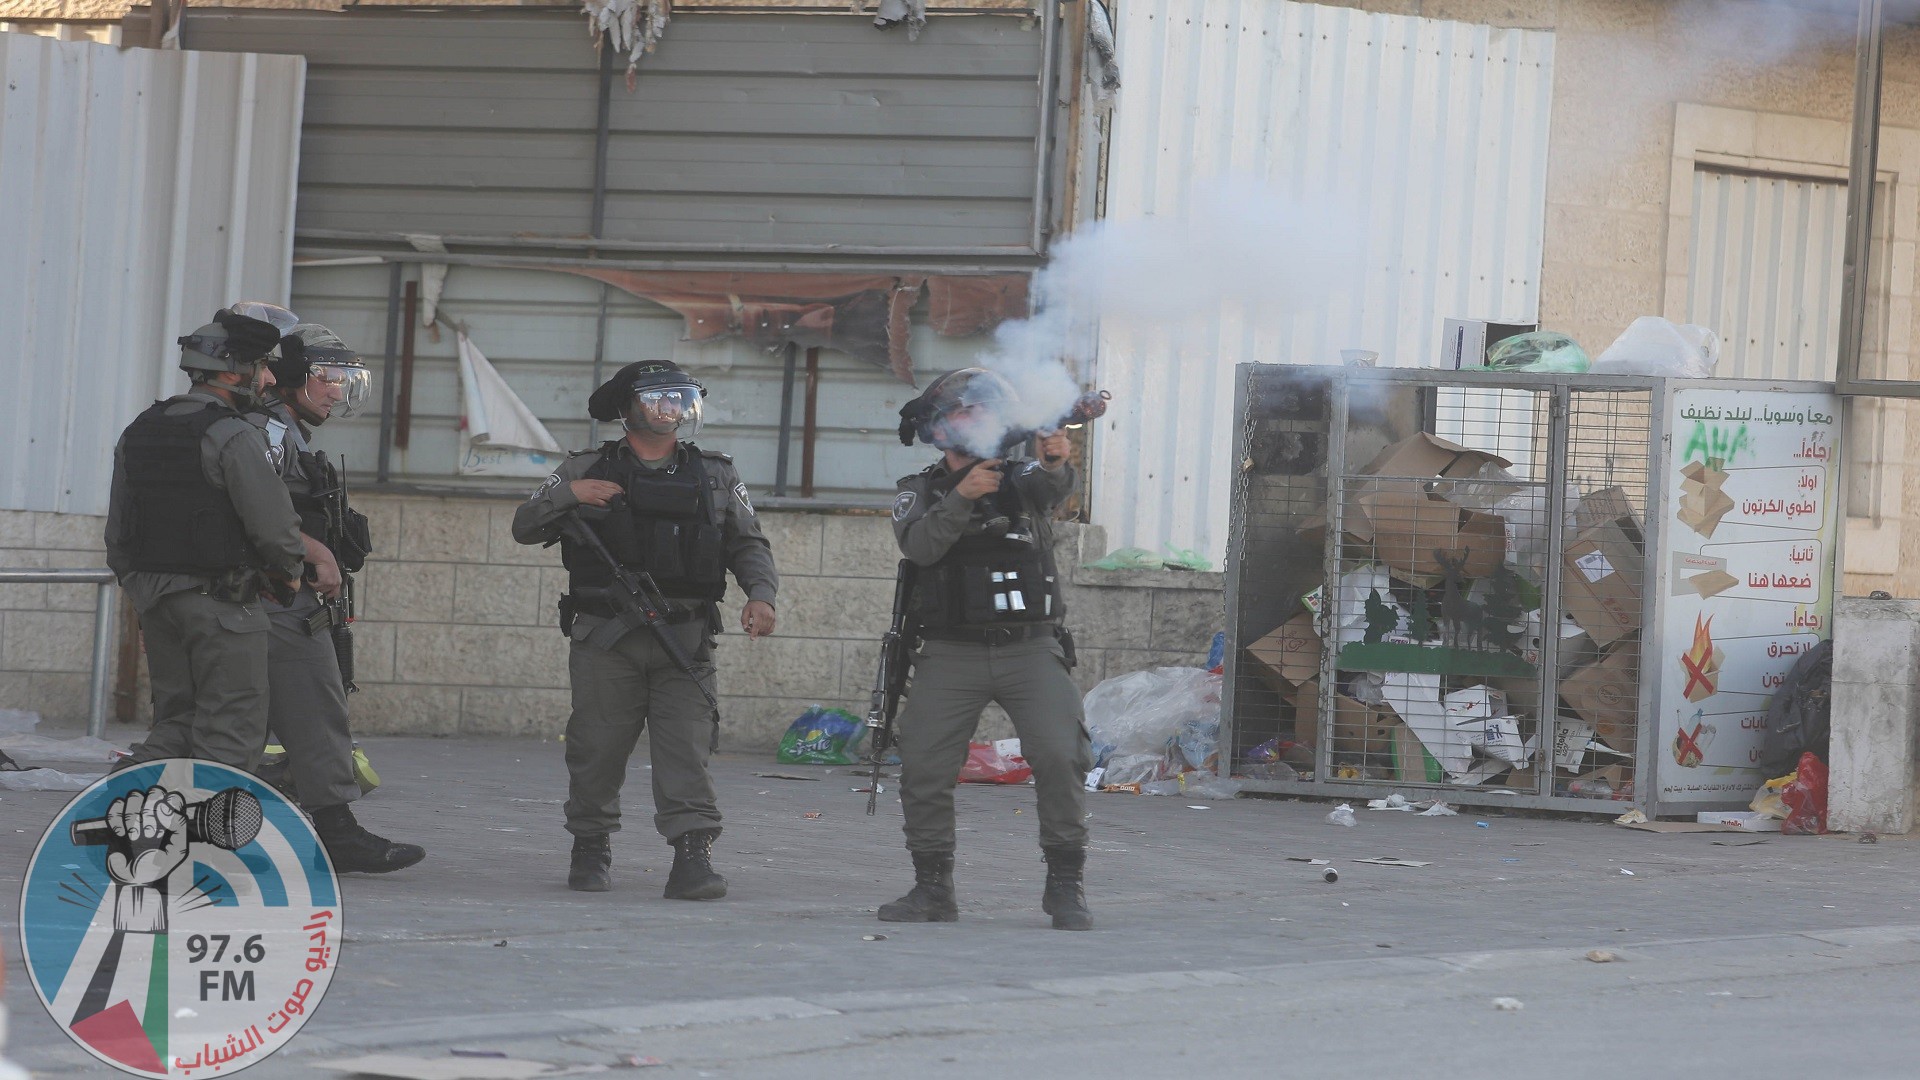 BETHLEHEM, WEST BANK - APRIL 04: Israeli security forces attack with tear gas and plastic bullet against protesters during a demonstration to show solidarity with hunger striker Palestinian prisoners those held in Israeli prisons in Betlehem, West Bank on April 04, 2017. (Photo by Issam Rimawi/Anadolu Agency/Getty Images)